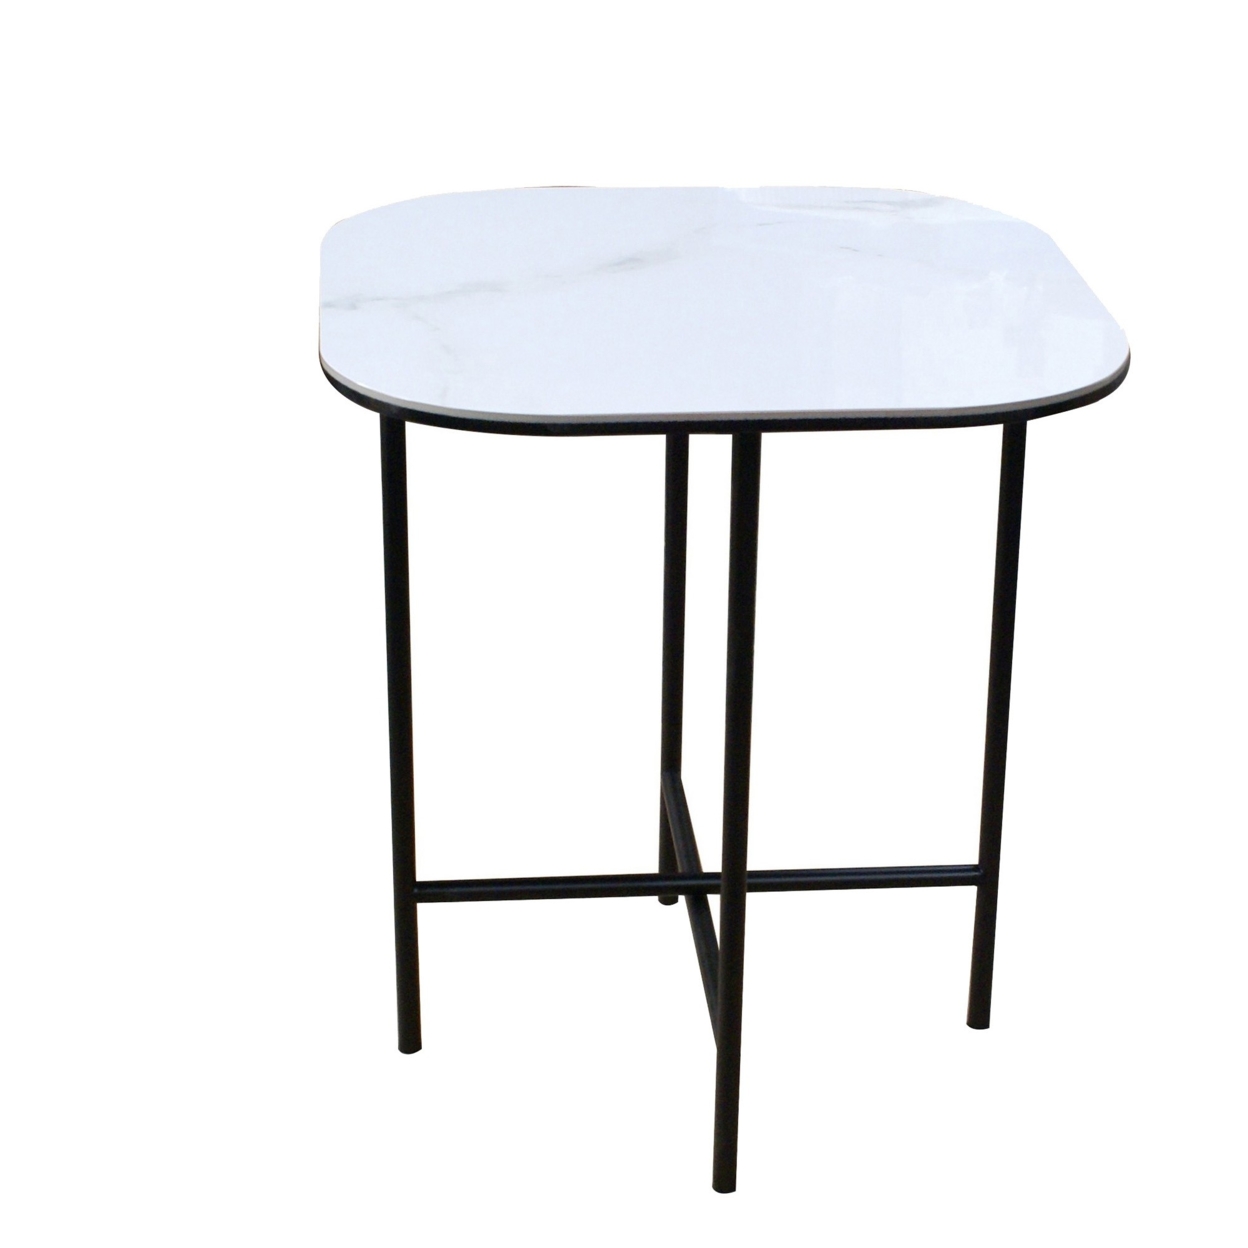 End Table With Ceramic Top And Metal Frame, White And Black- Saltoro Sherpi